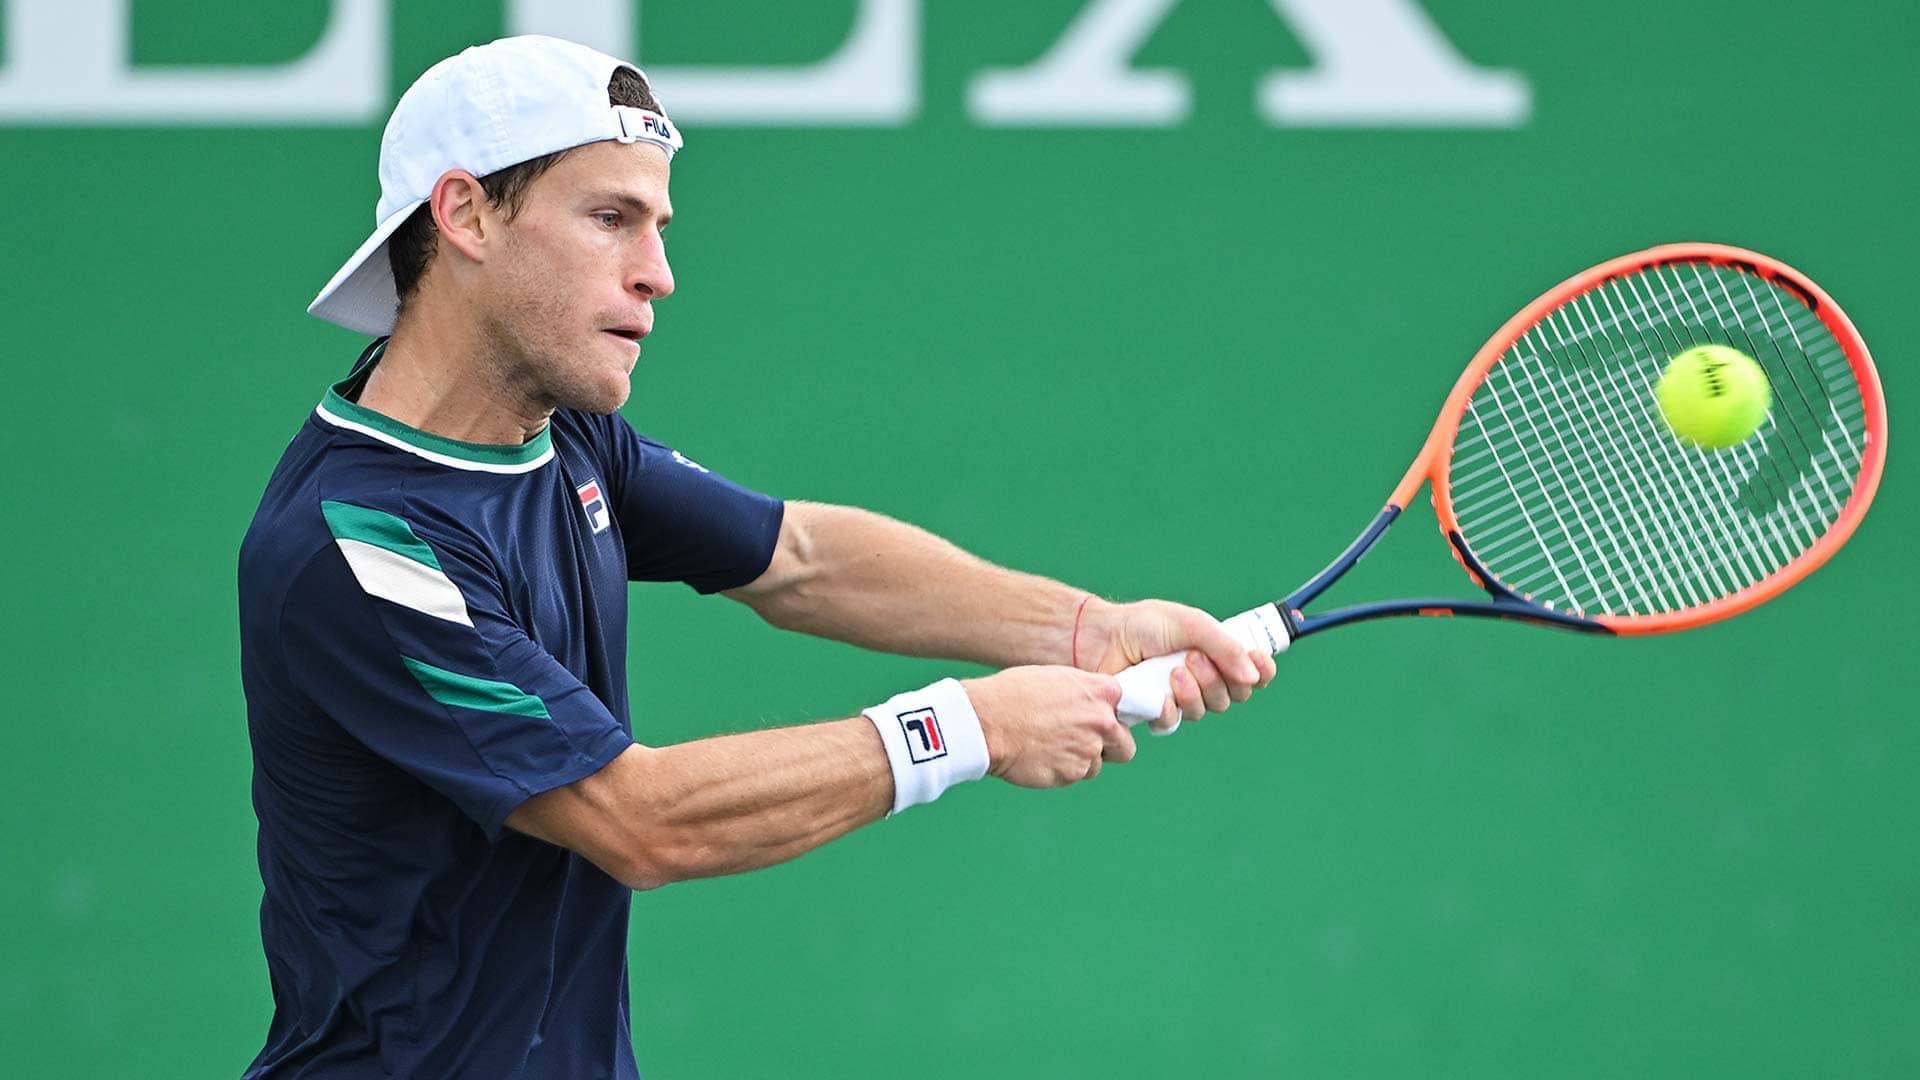 Diego Schwartzman defeats Taylor Fritz in Shanghai to earn his first Top 10 win of the season.